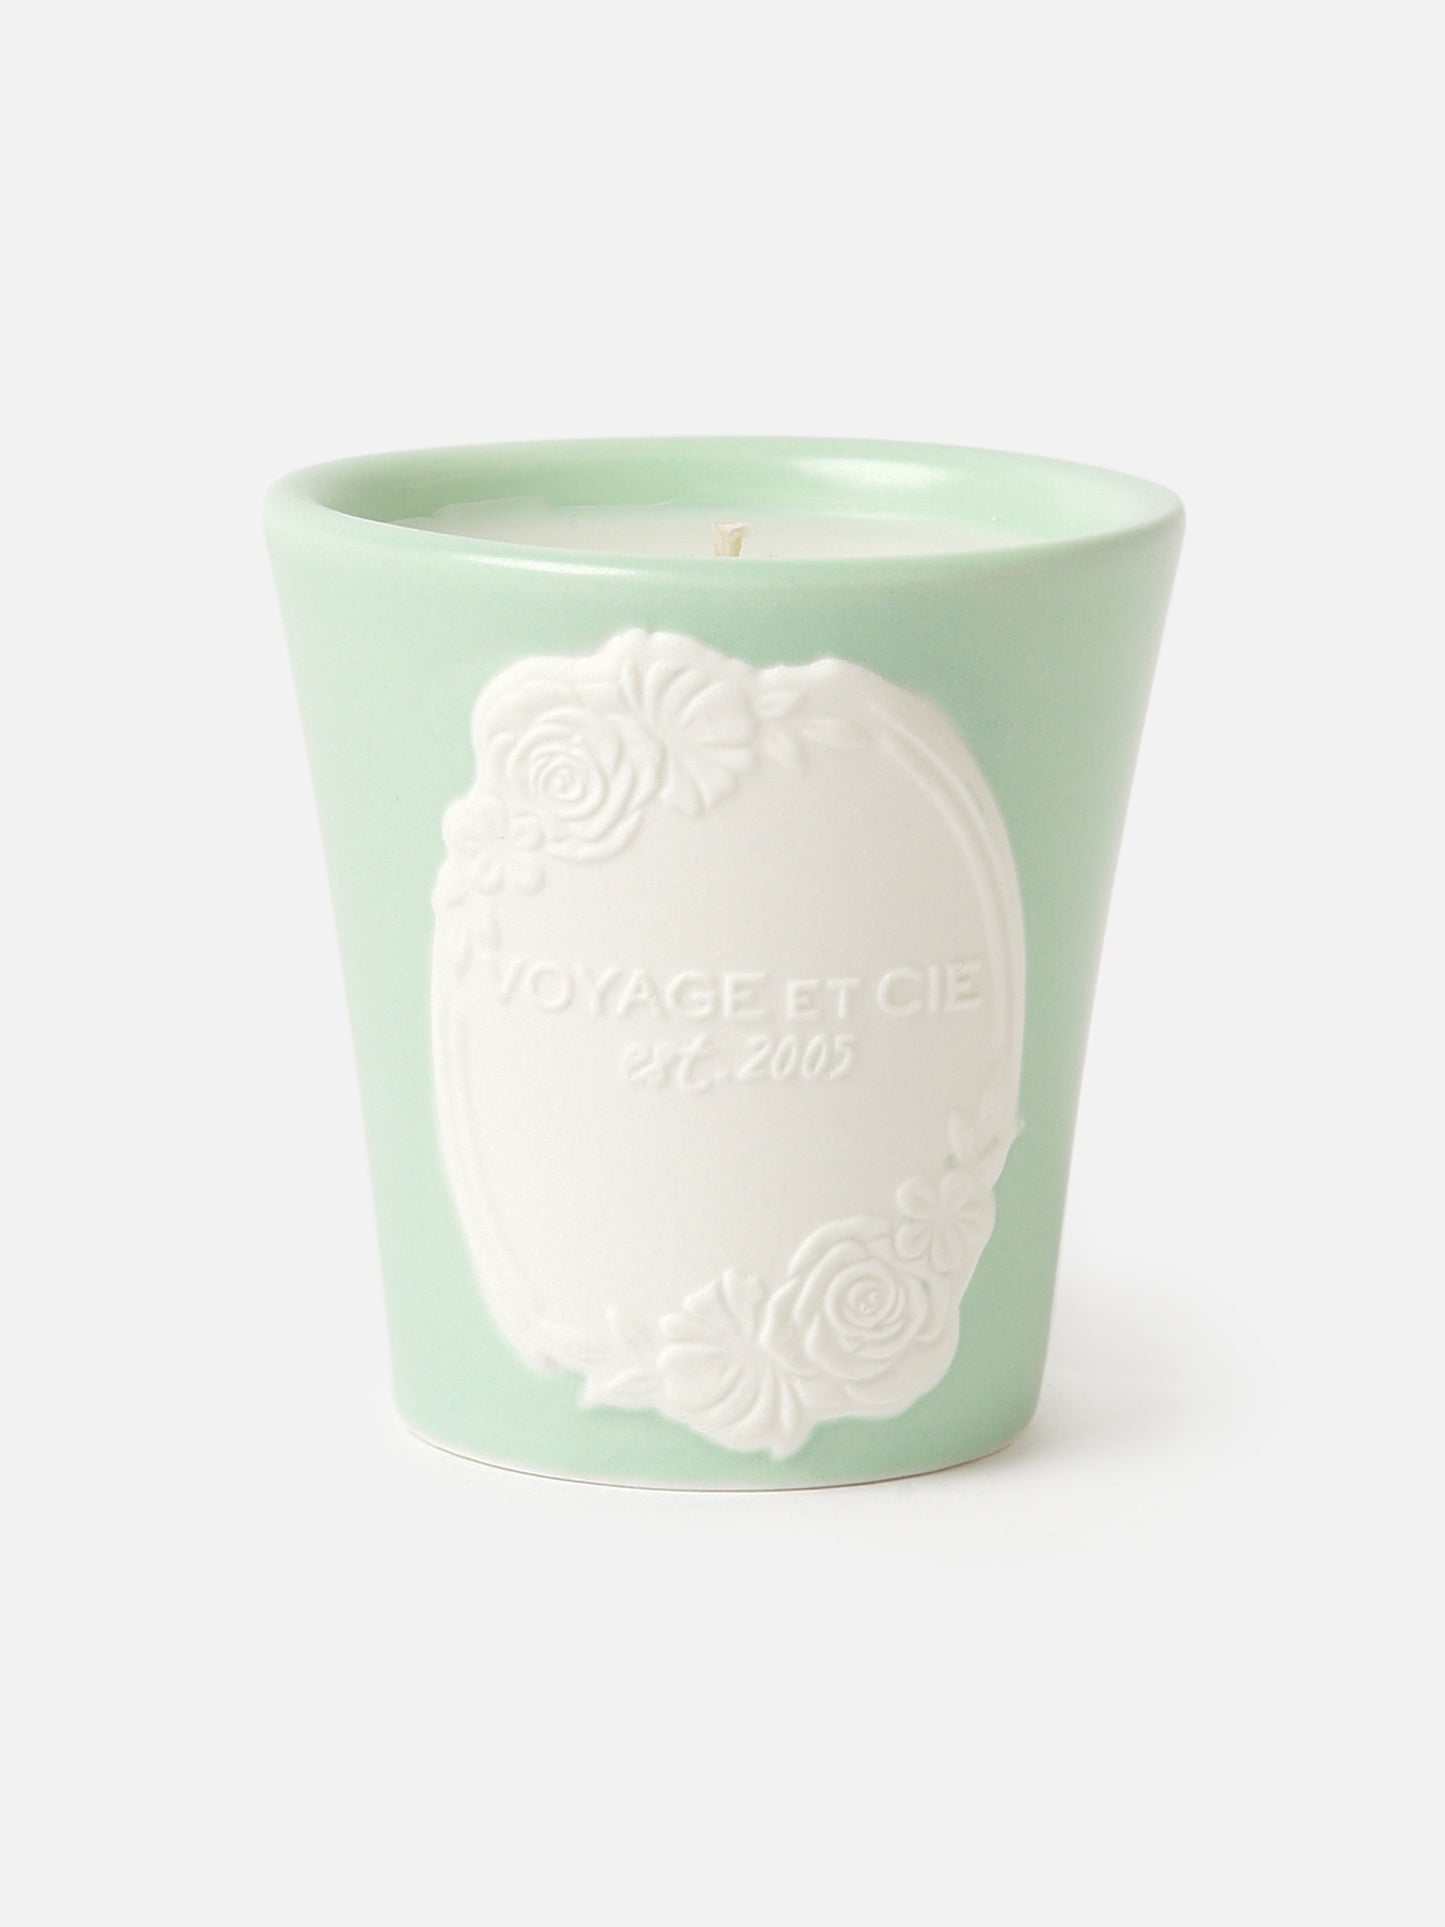 Voyage Et Cie Cameo Collection Candle